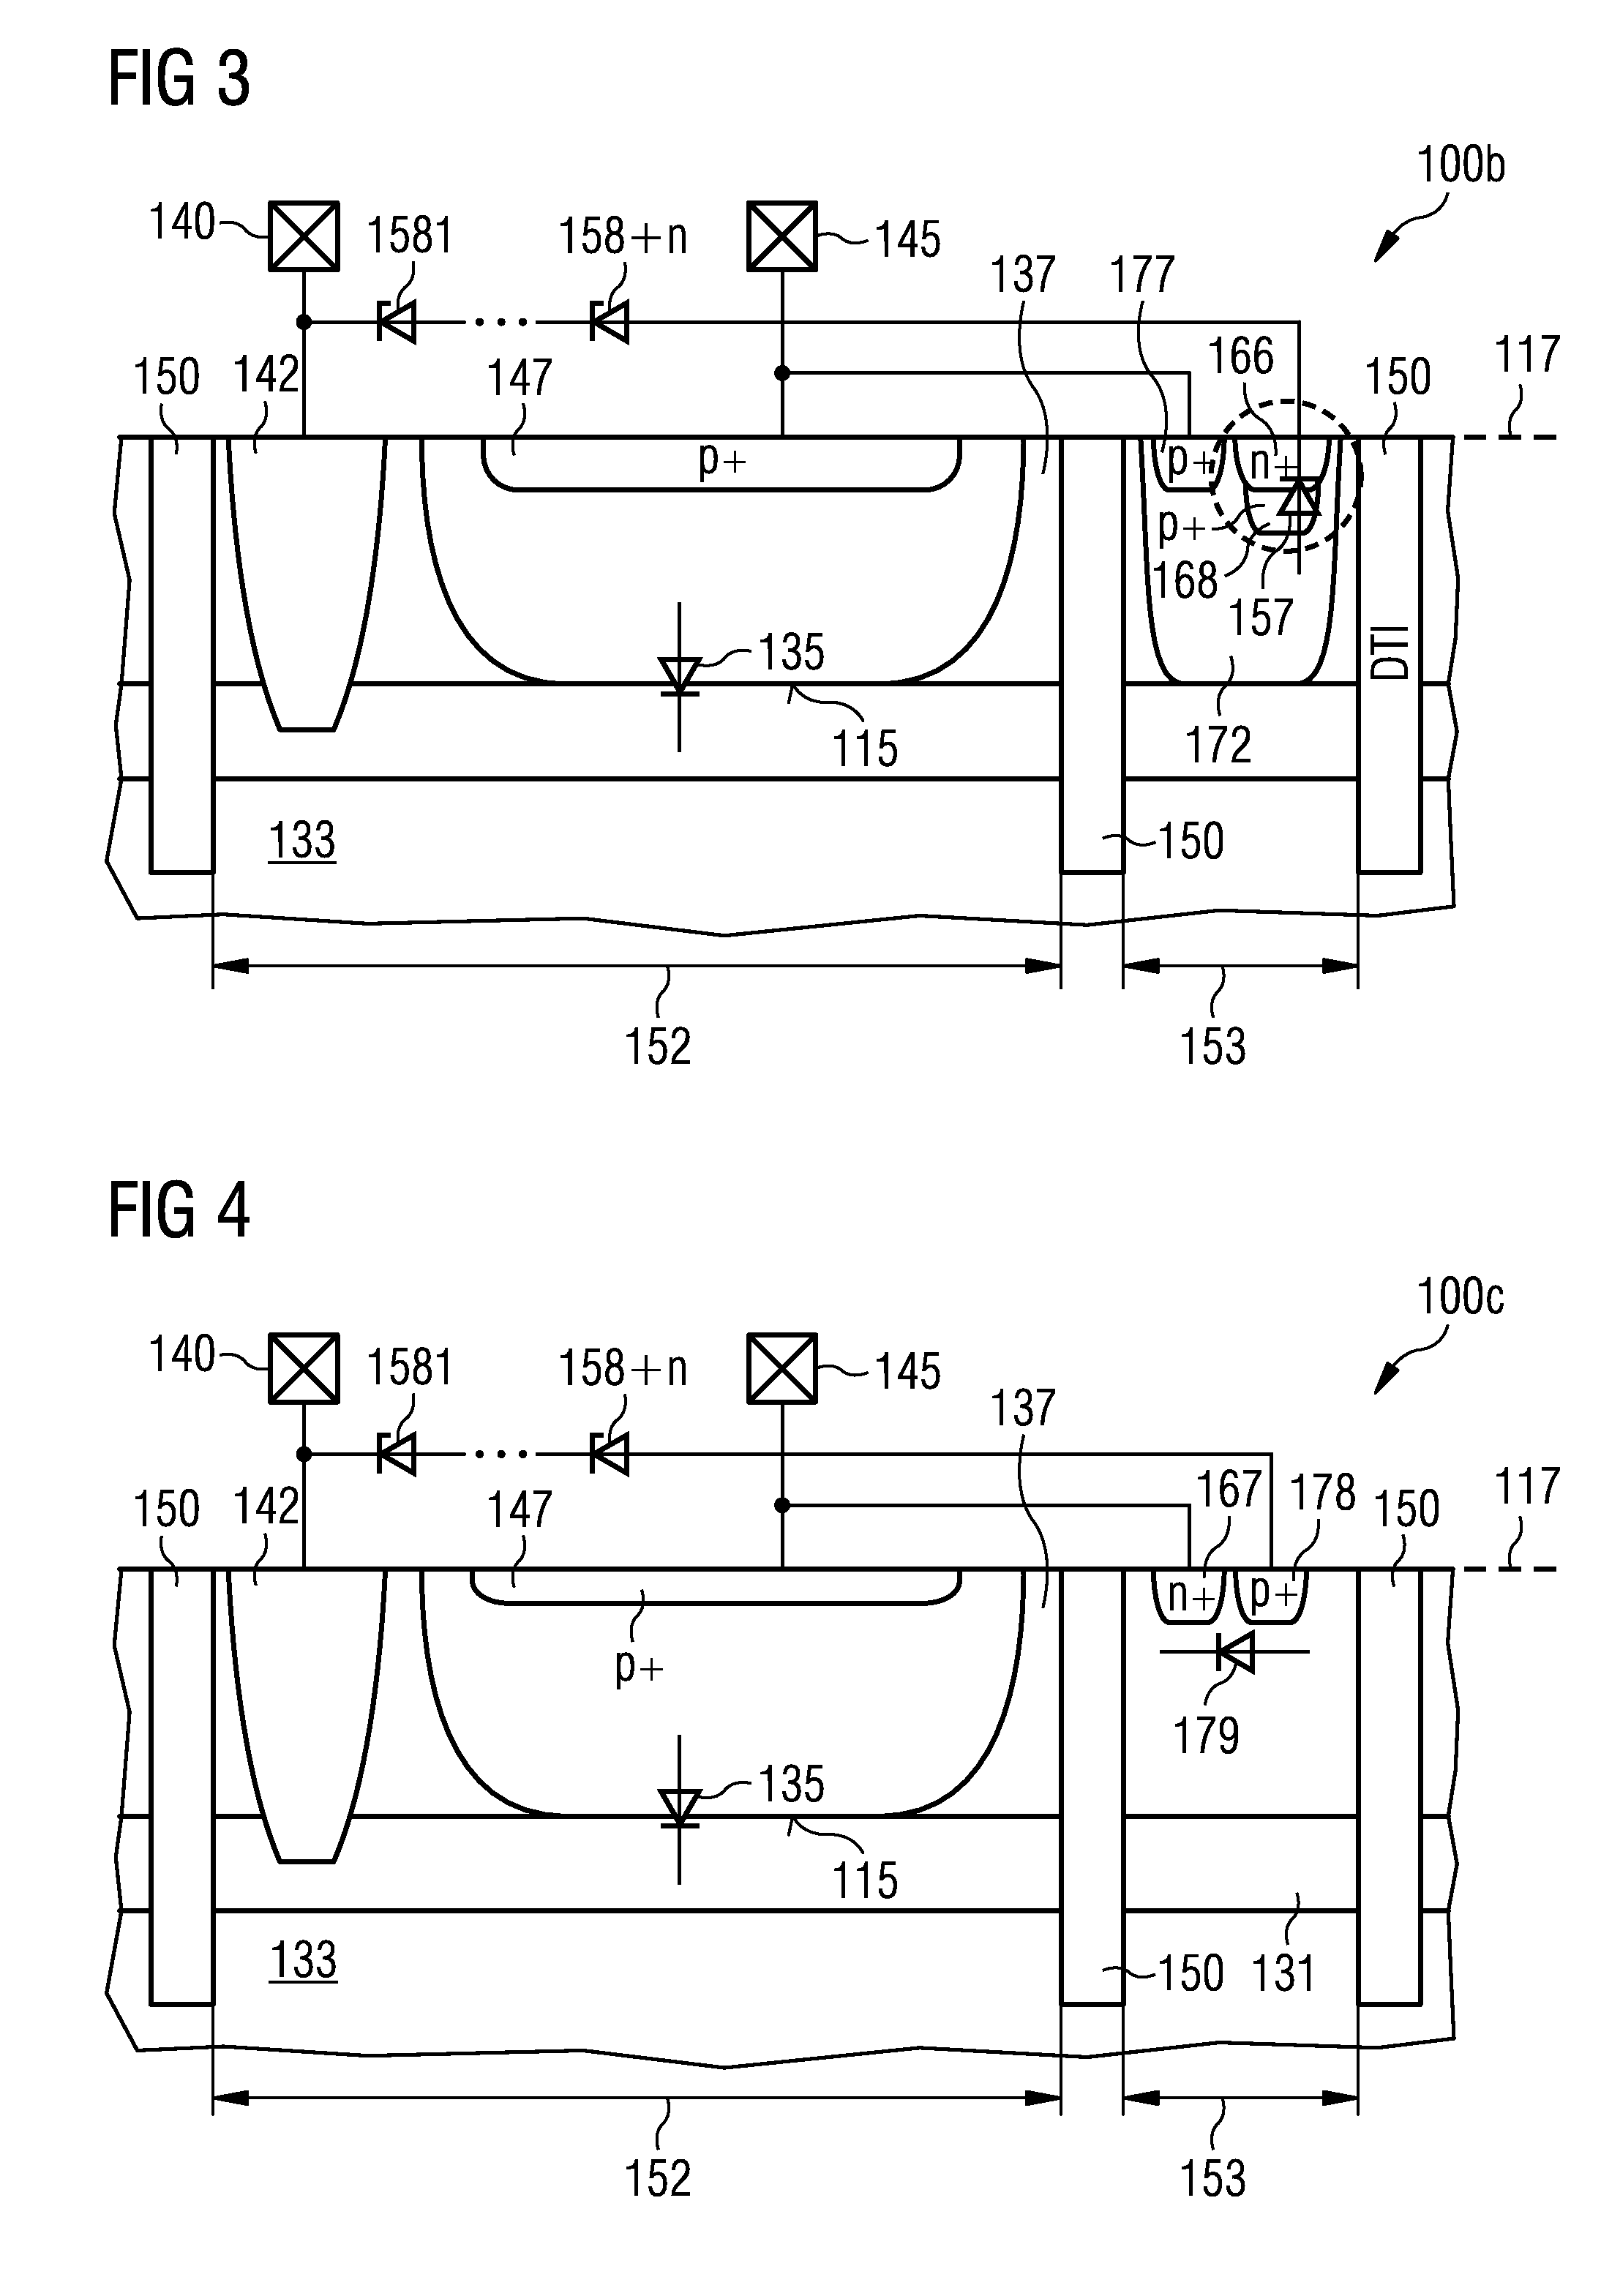 Semiconductor Component and Method of Triggering Avalanche Breakdown